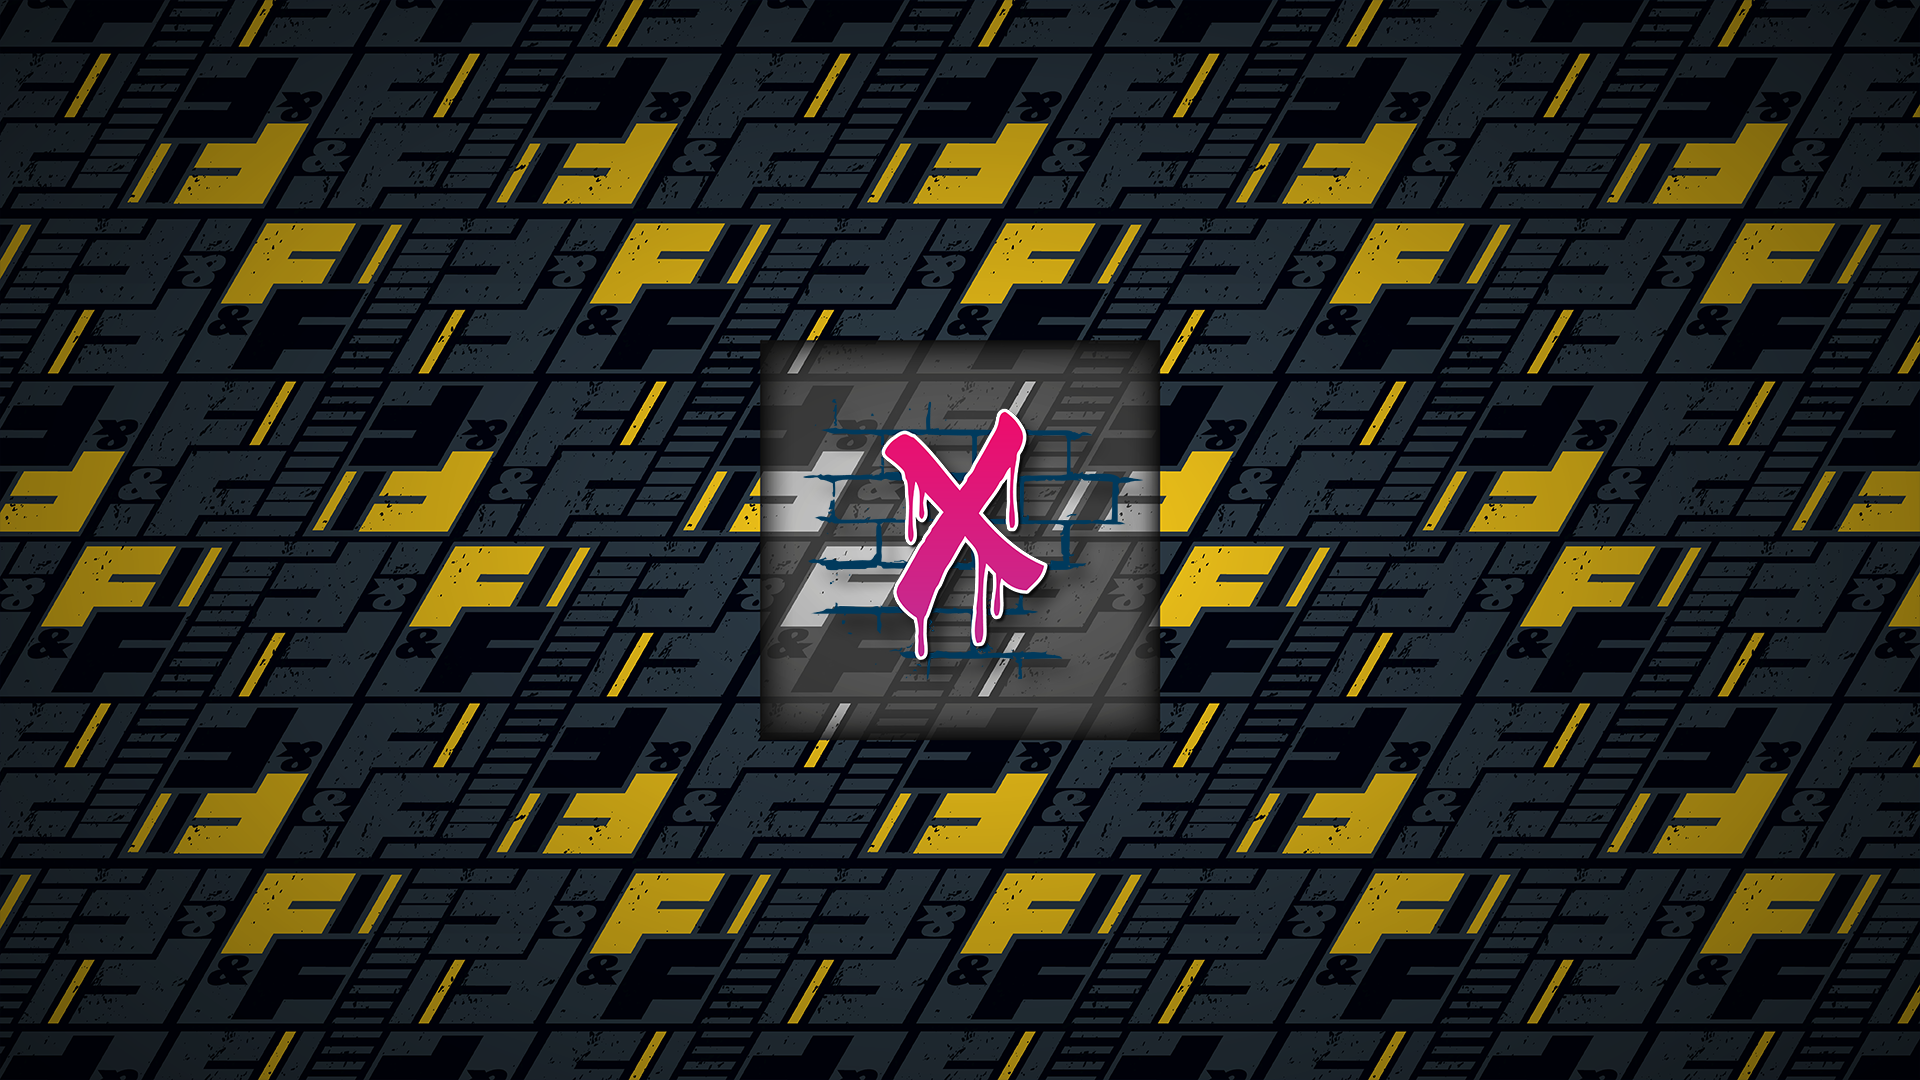 Icon for Sh1ft3r Overdrive